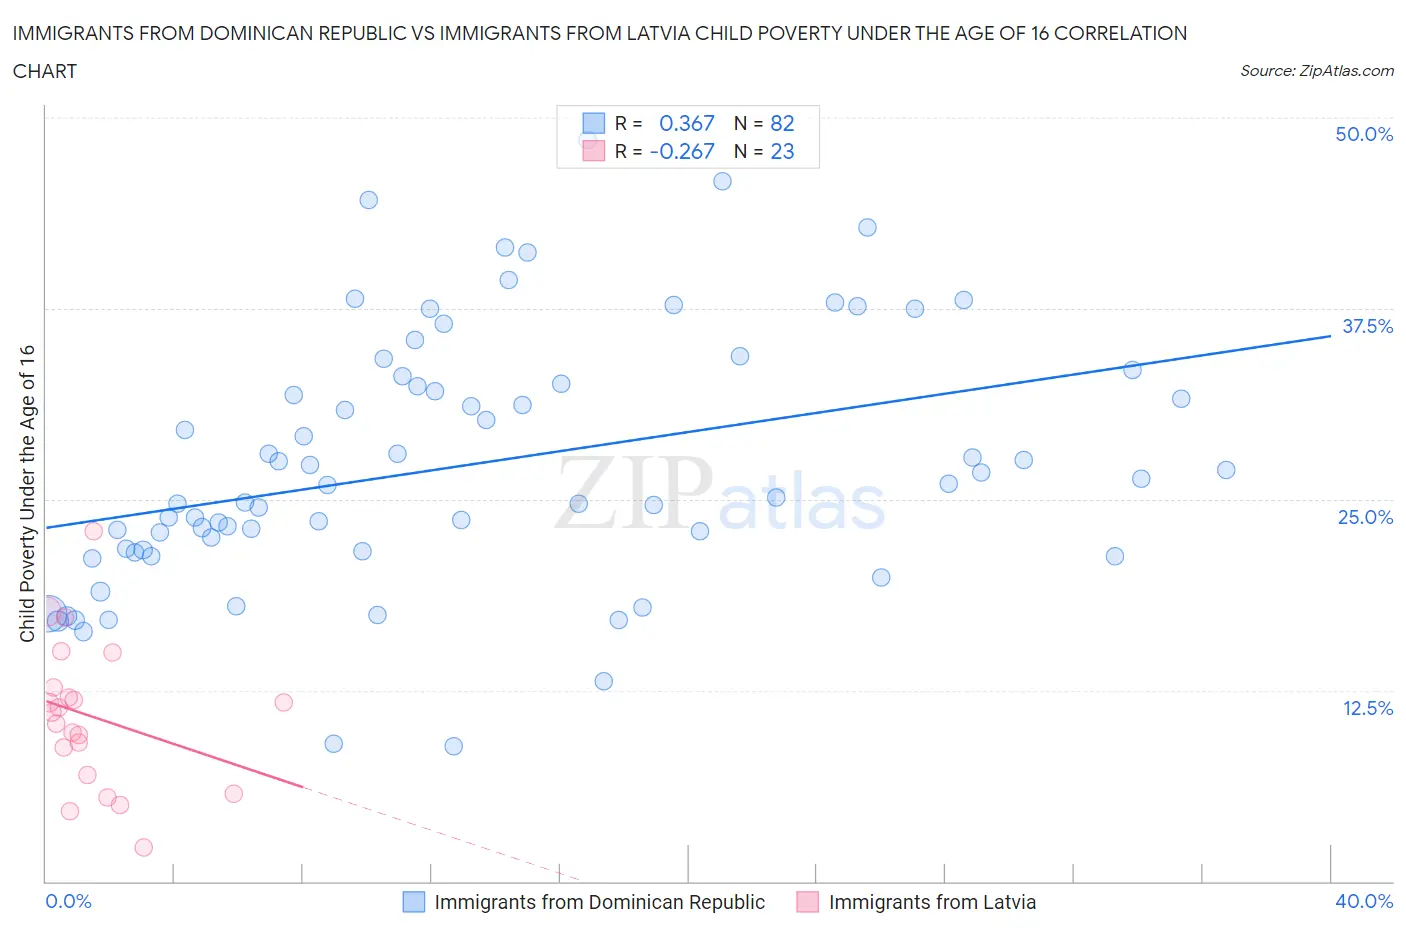 Immigrants from Dominican Republic vs Immigrants from Latvia Child Poverty Under the Age of 16